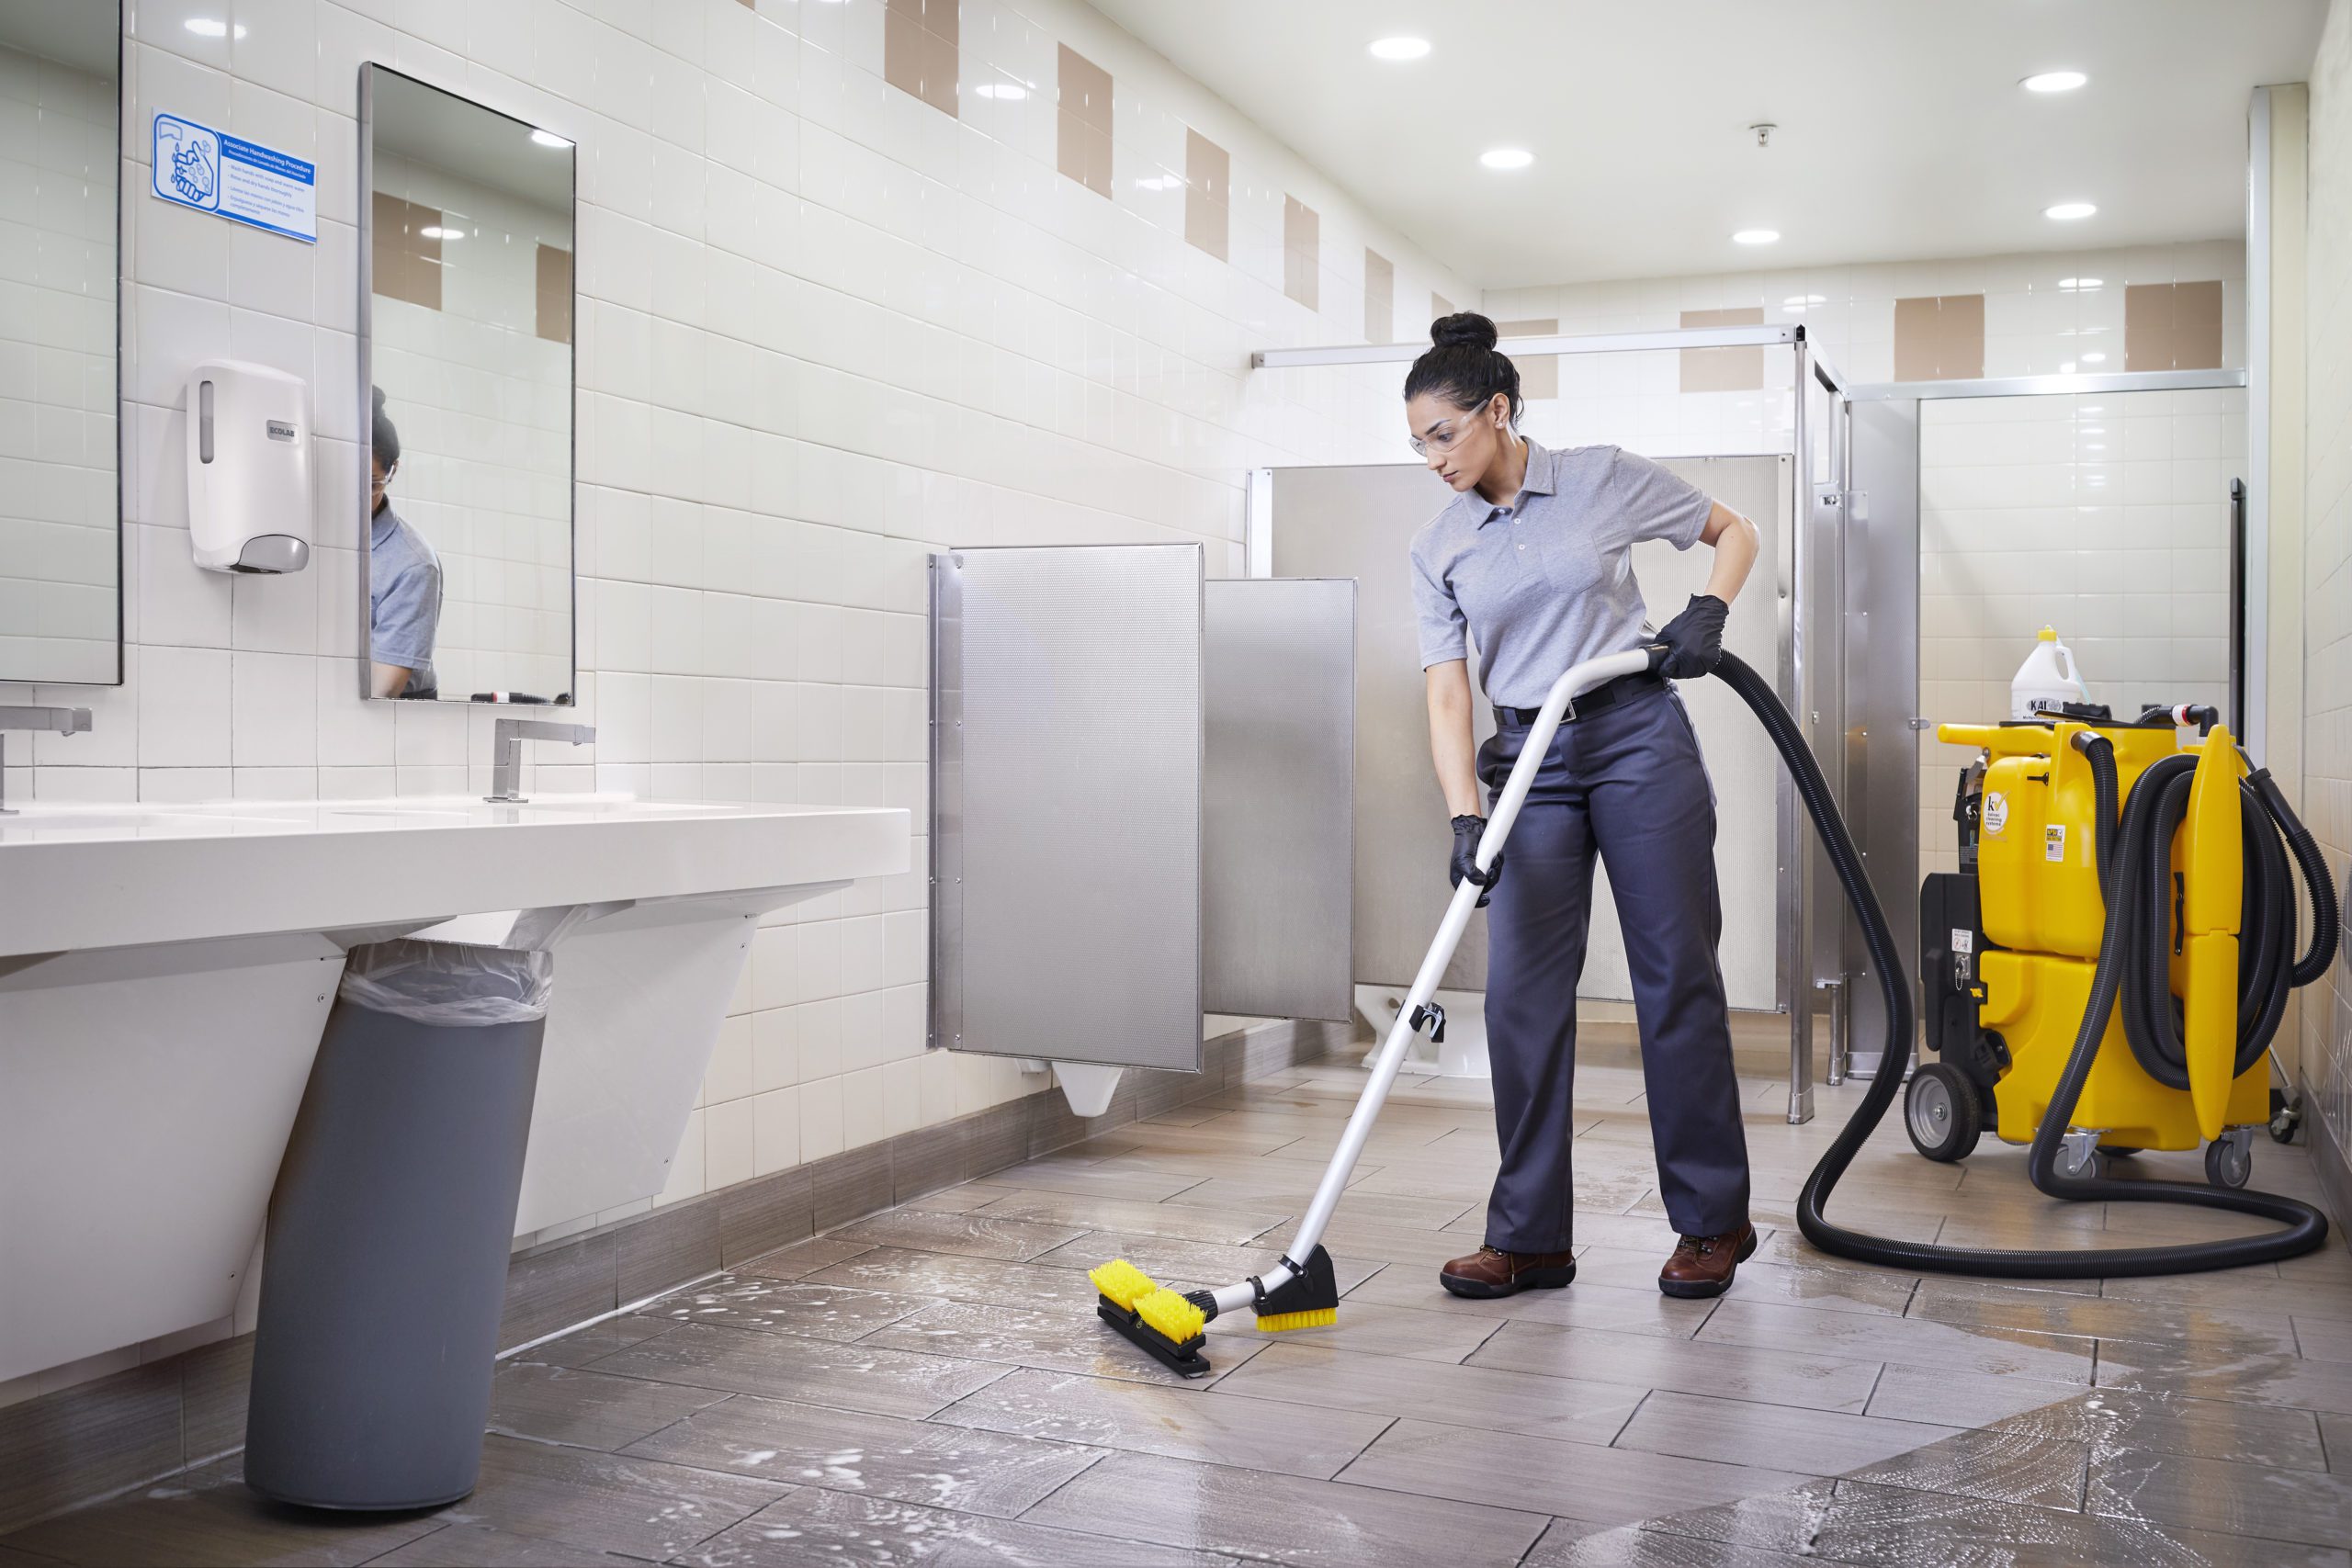 How to Evaluate Labor Savings by Cleaning with Microfiber vs Cotton